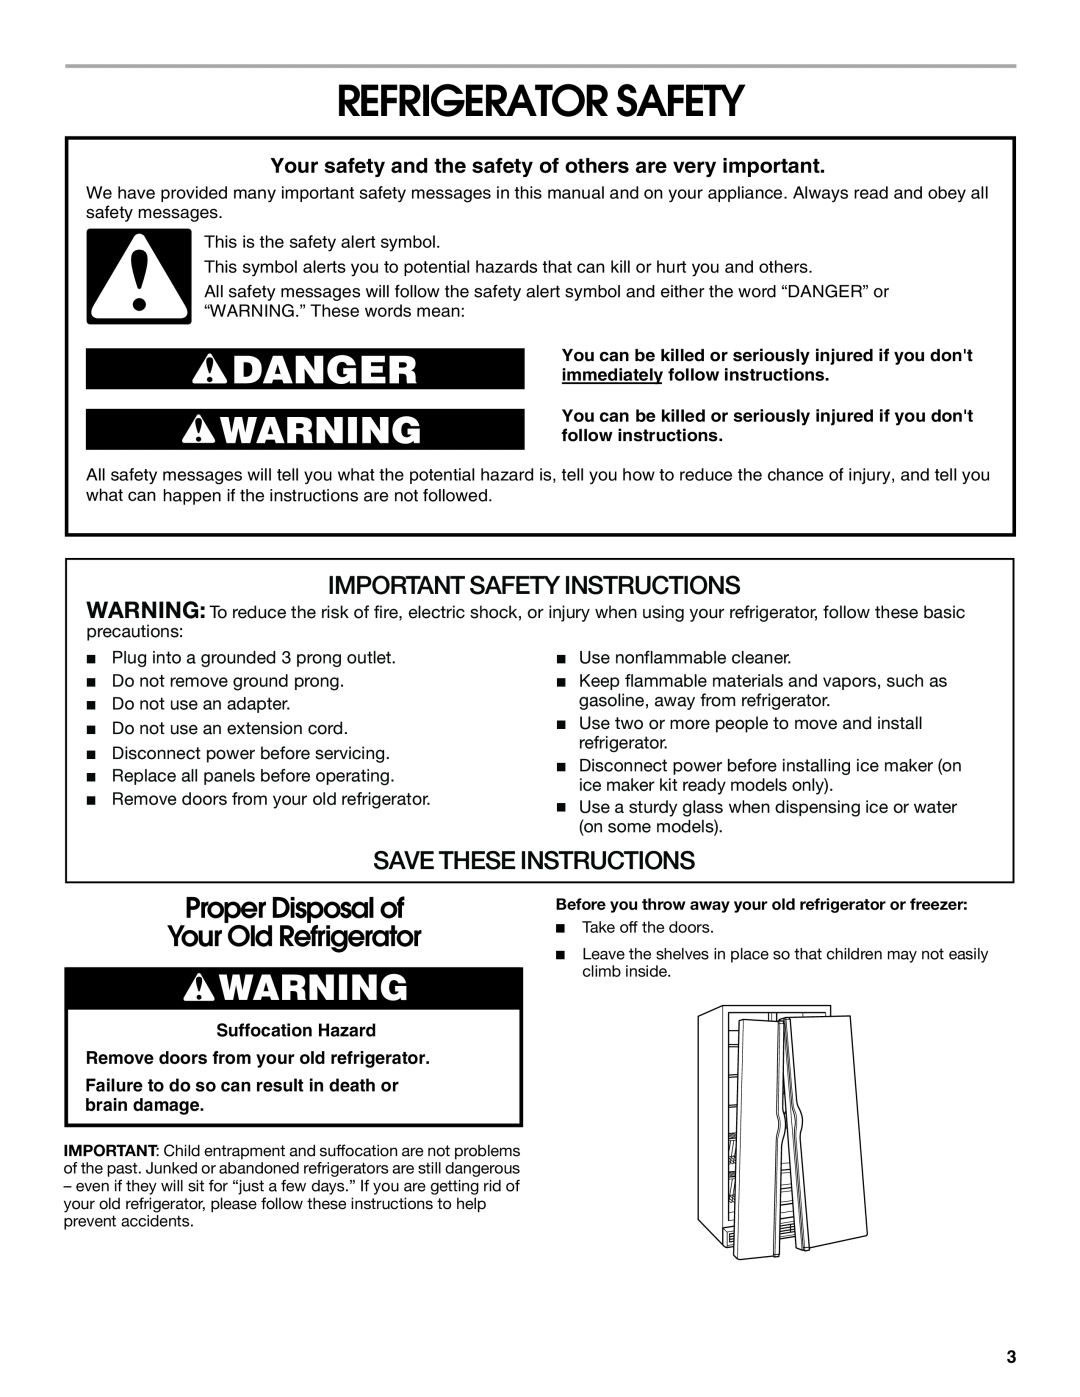 Whirlpool TS25AFXKQ00 manual Refrigerator Safety, Proper Disposal of Your Old Refrigerator, Important Safety Instructions 